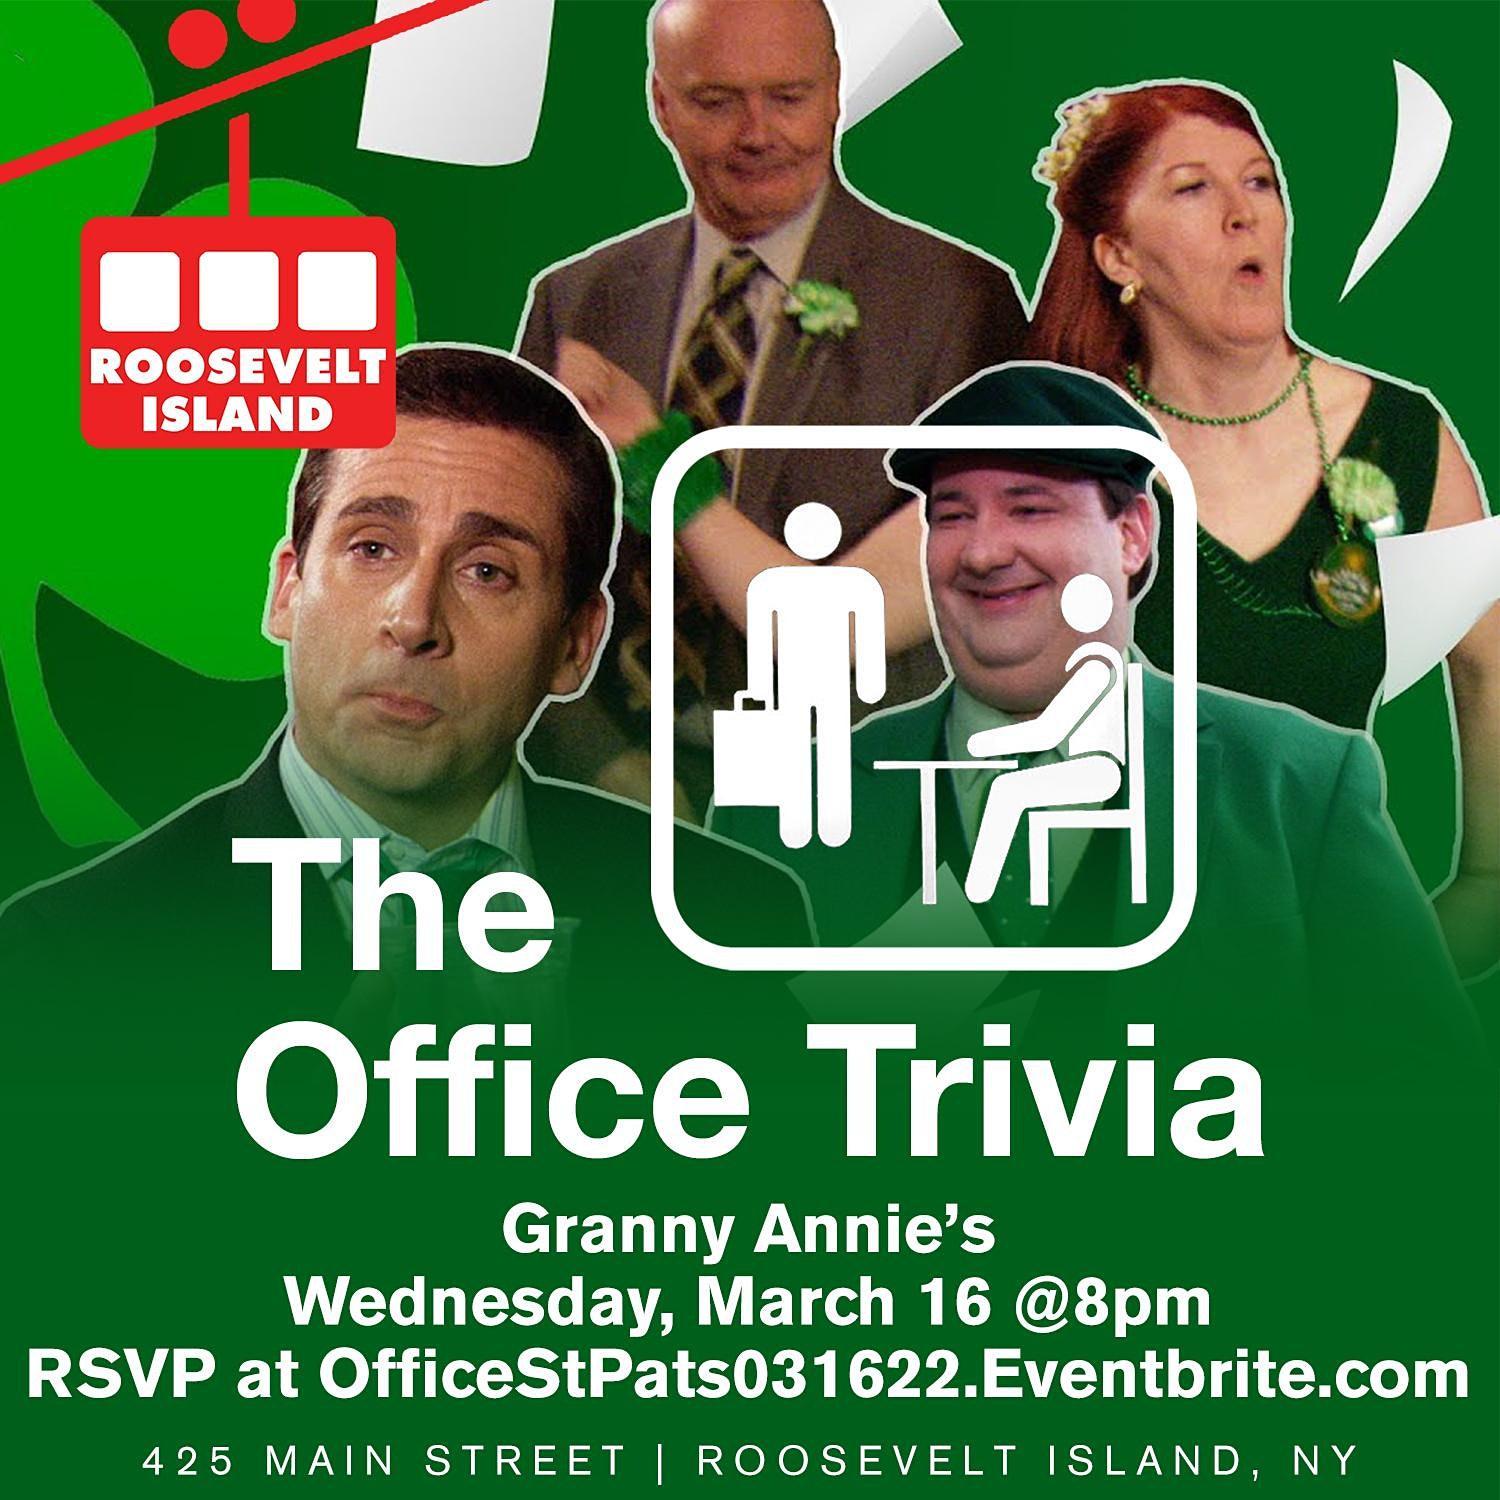 The Office: St. Paddy’s Day Trivia